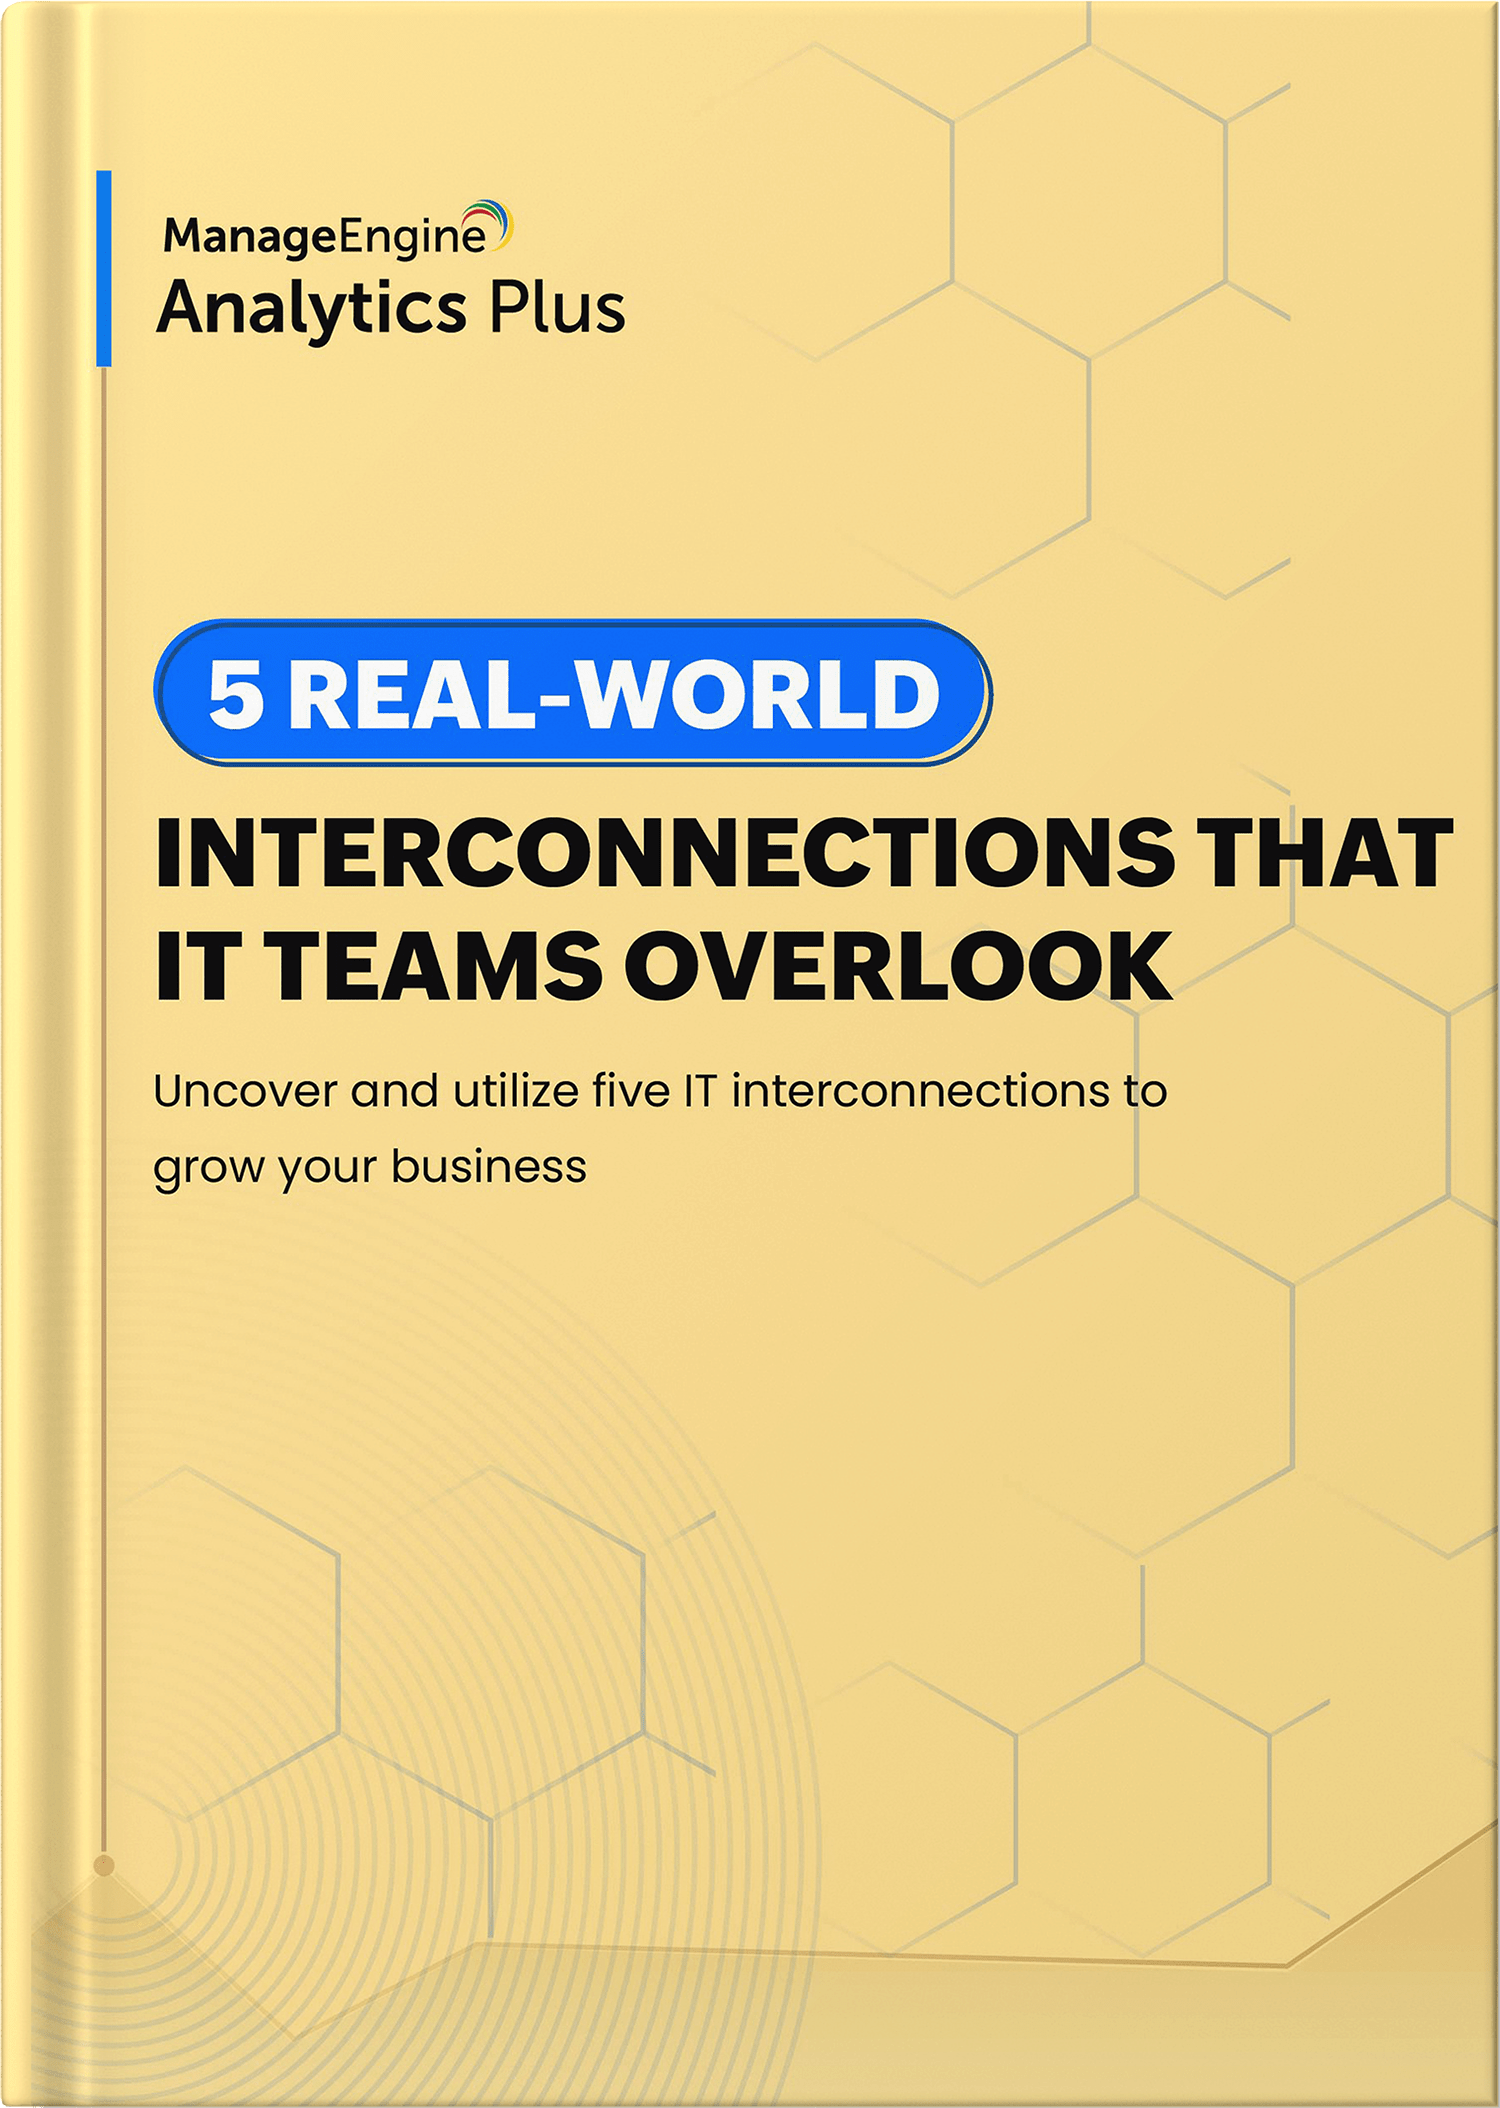 5 real-world interconnections that IT teams overlook